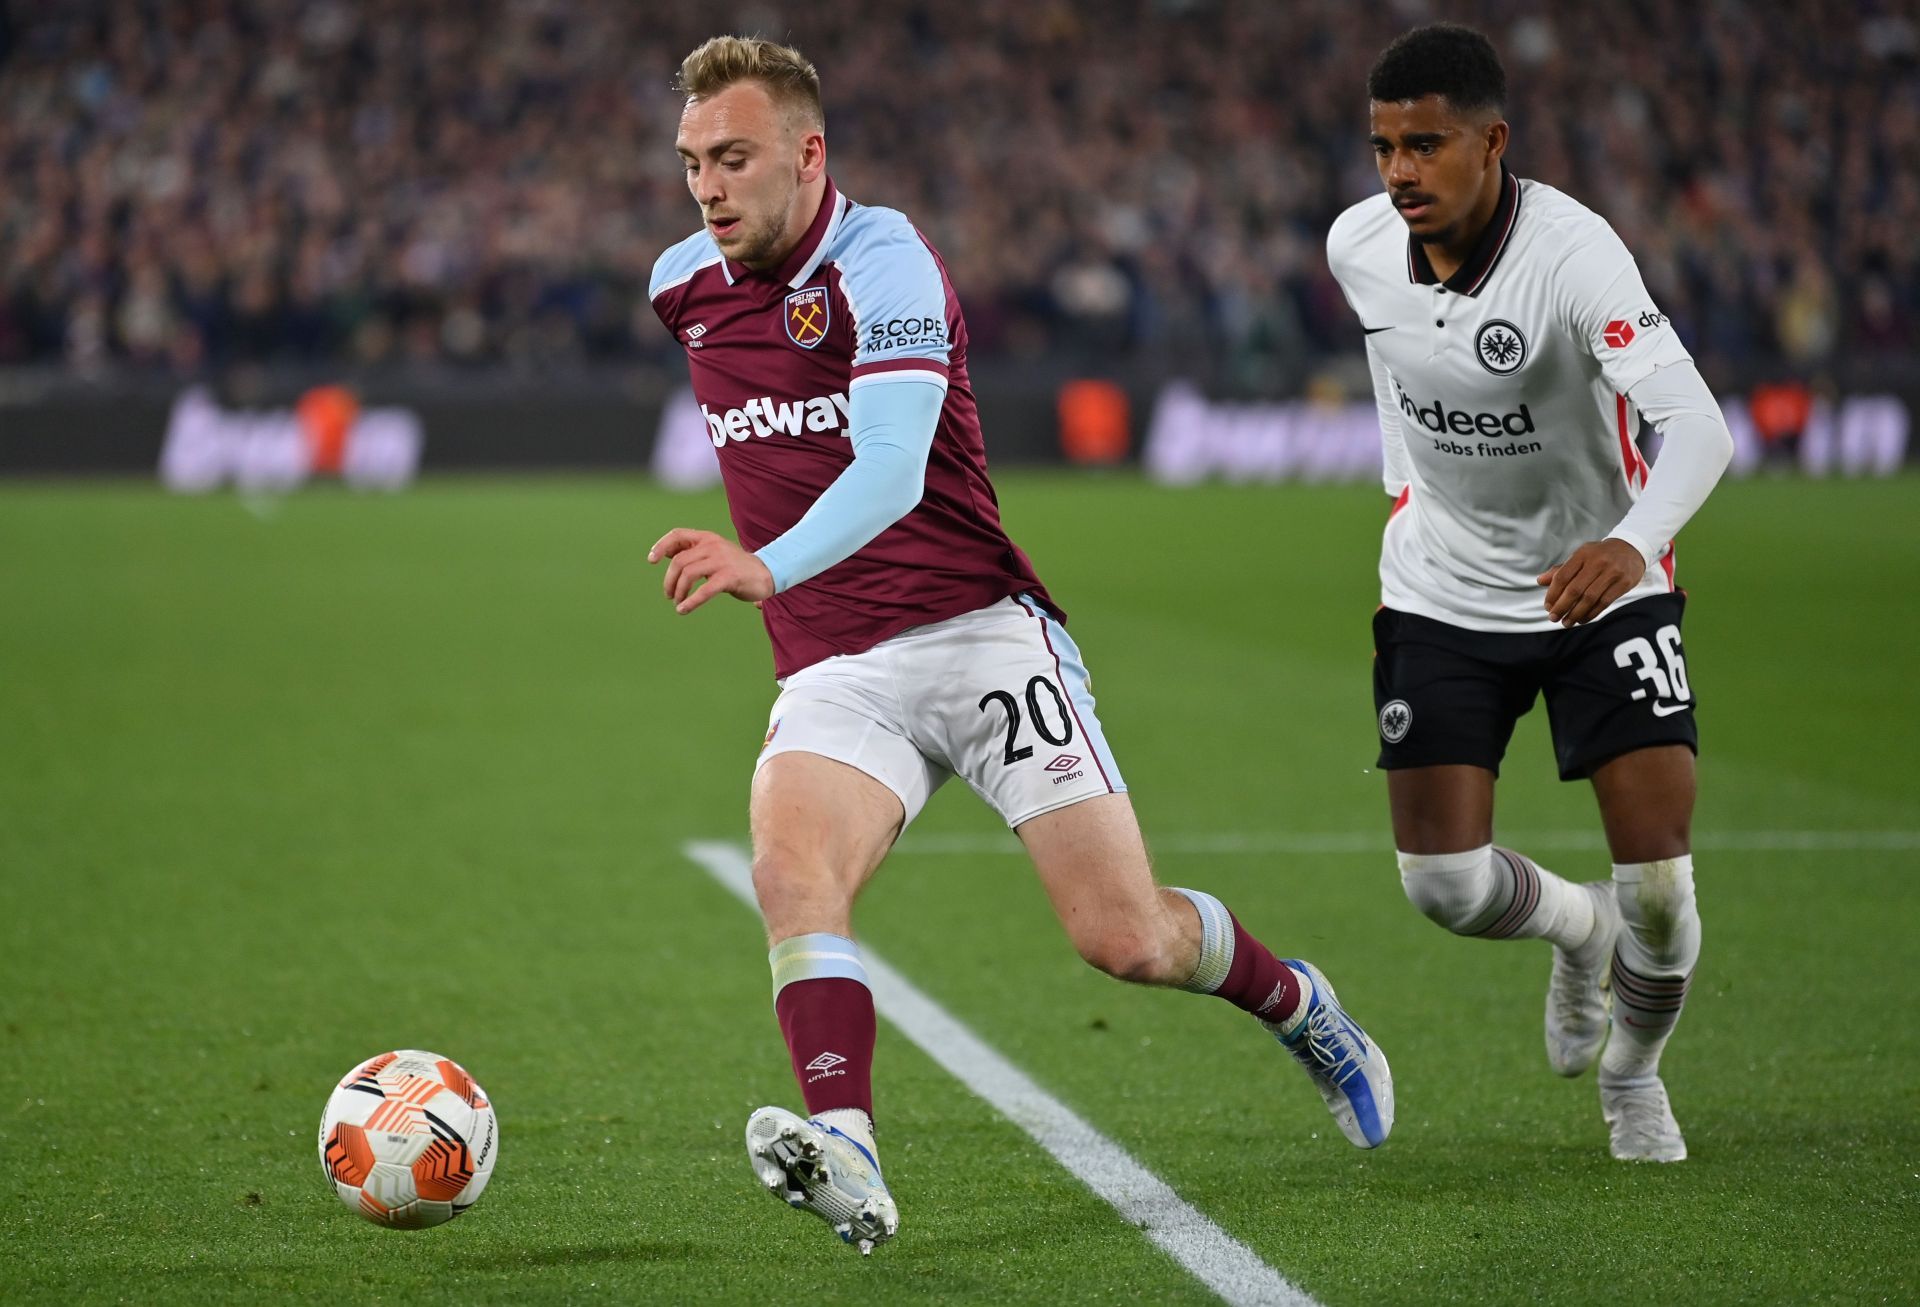 Bowen in action for West Ham United